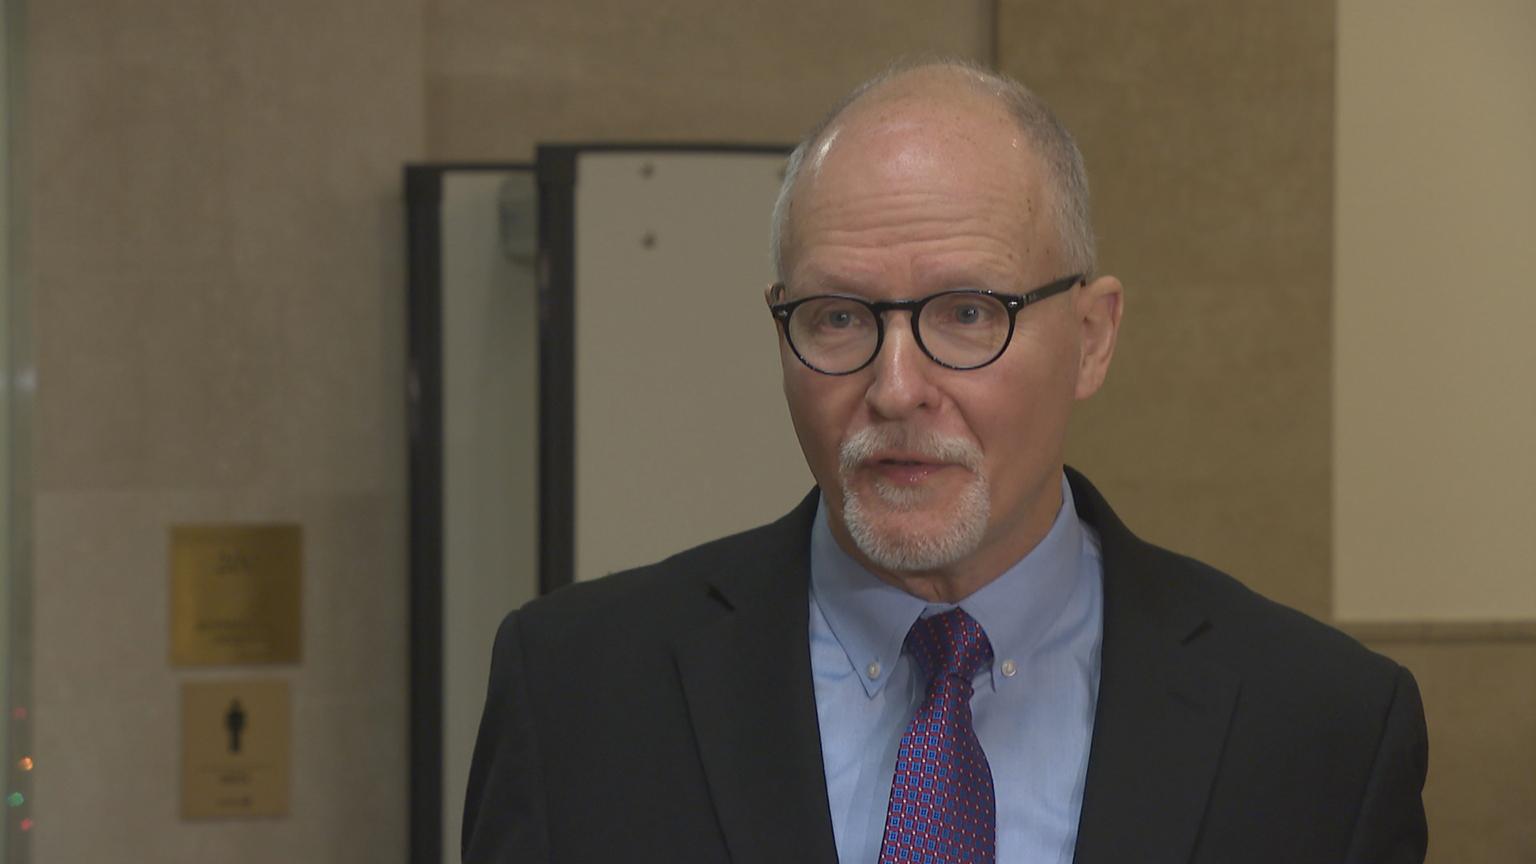 Chicago mayoral candidate Paul Vallas wants candidates to release their tax returns. “You’ve got ‘em. You filed ‘em, you submitted ‘em. Just release ‘em,” he said Thursday, Dec. 20, 2018.